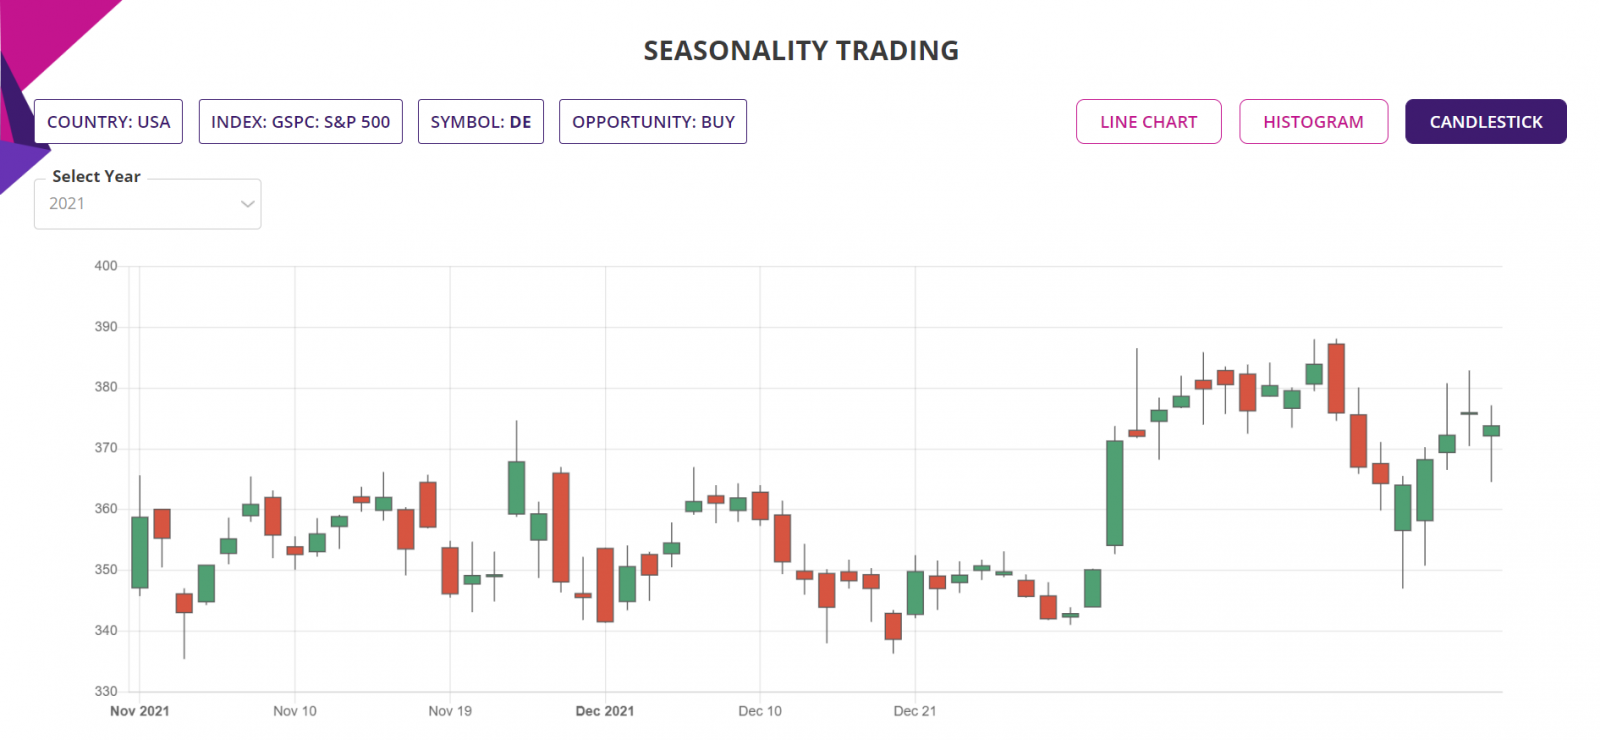 Seasonality trading strategy, detailed report, candlestick chart, S&P500 Stock